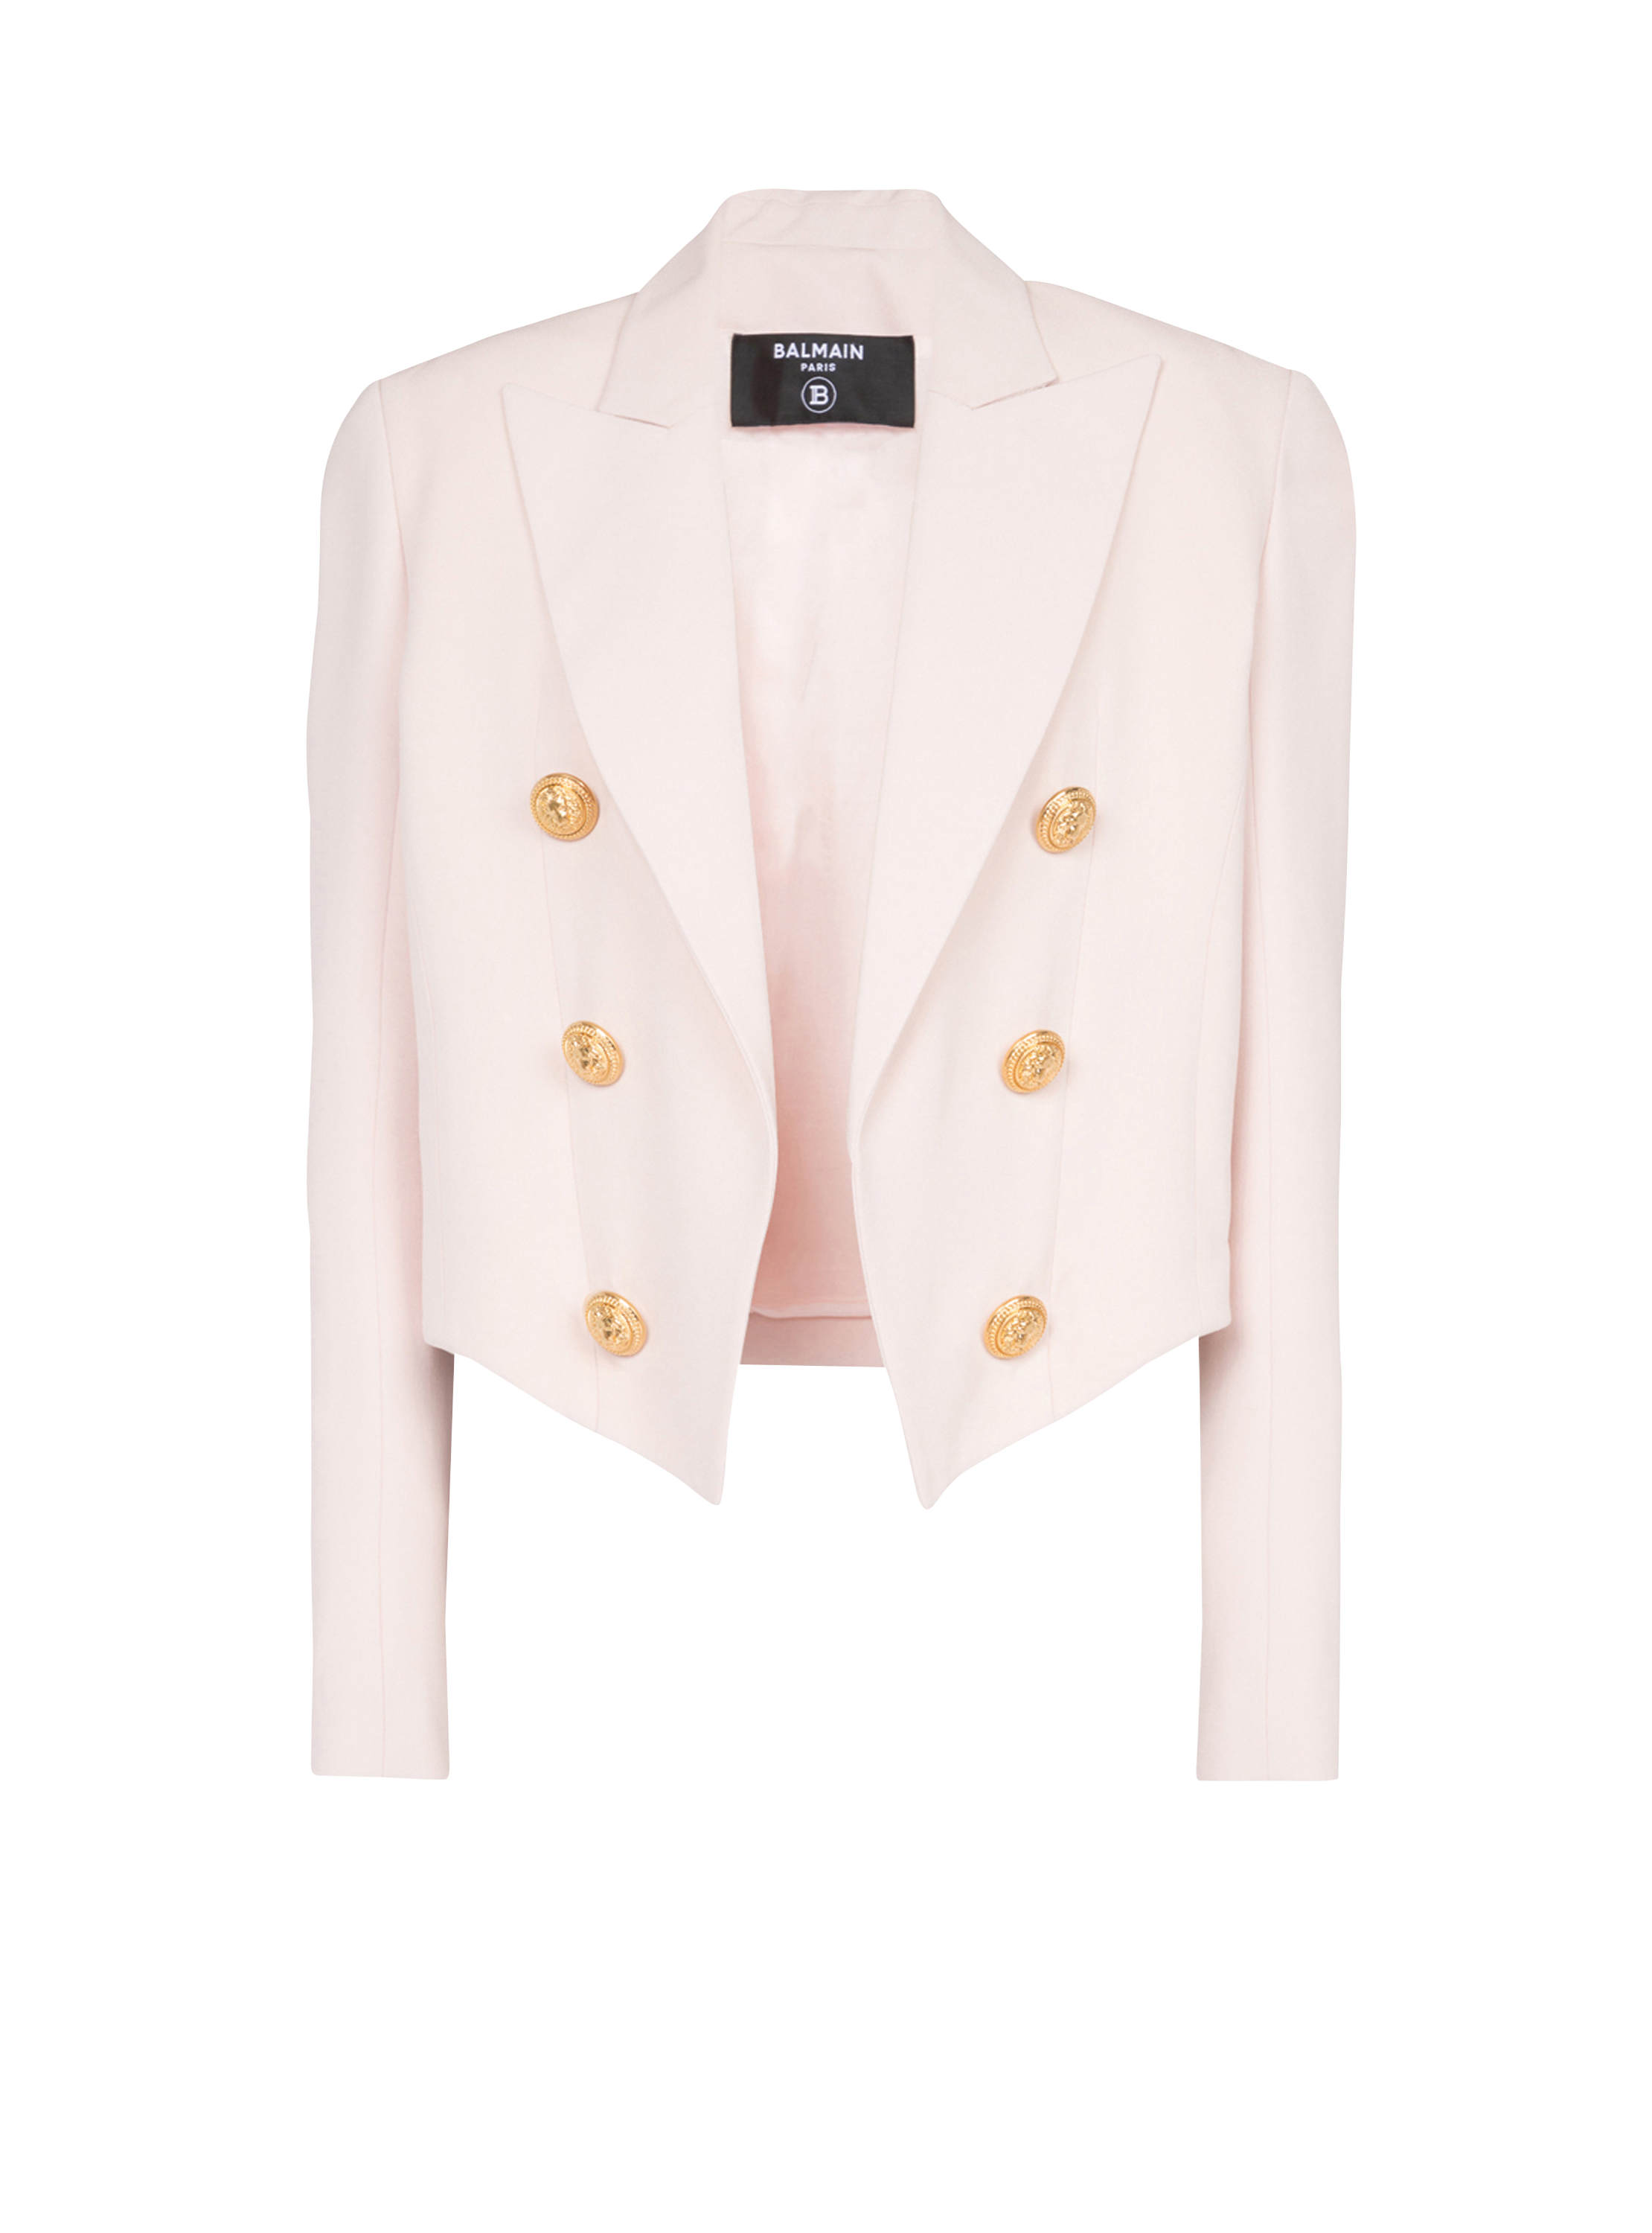 sport coats and suit jackets Save 27% Womens Clothing Jackets Blazers Balmain Wool Double Breasted Cropped Jacket in White 